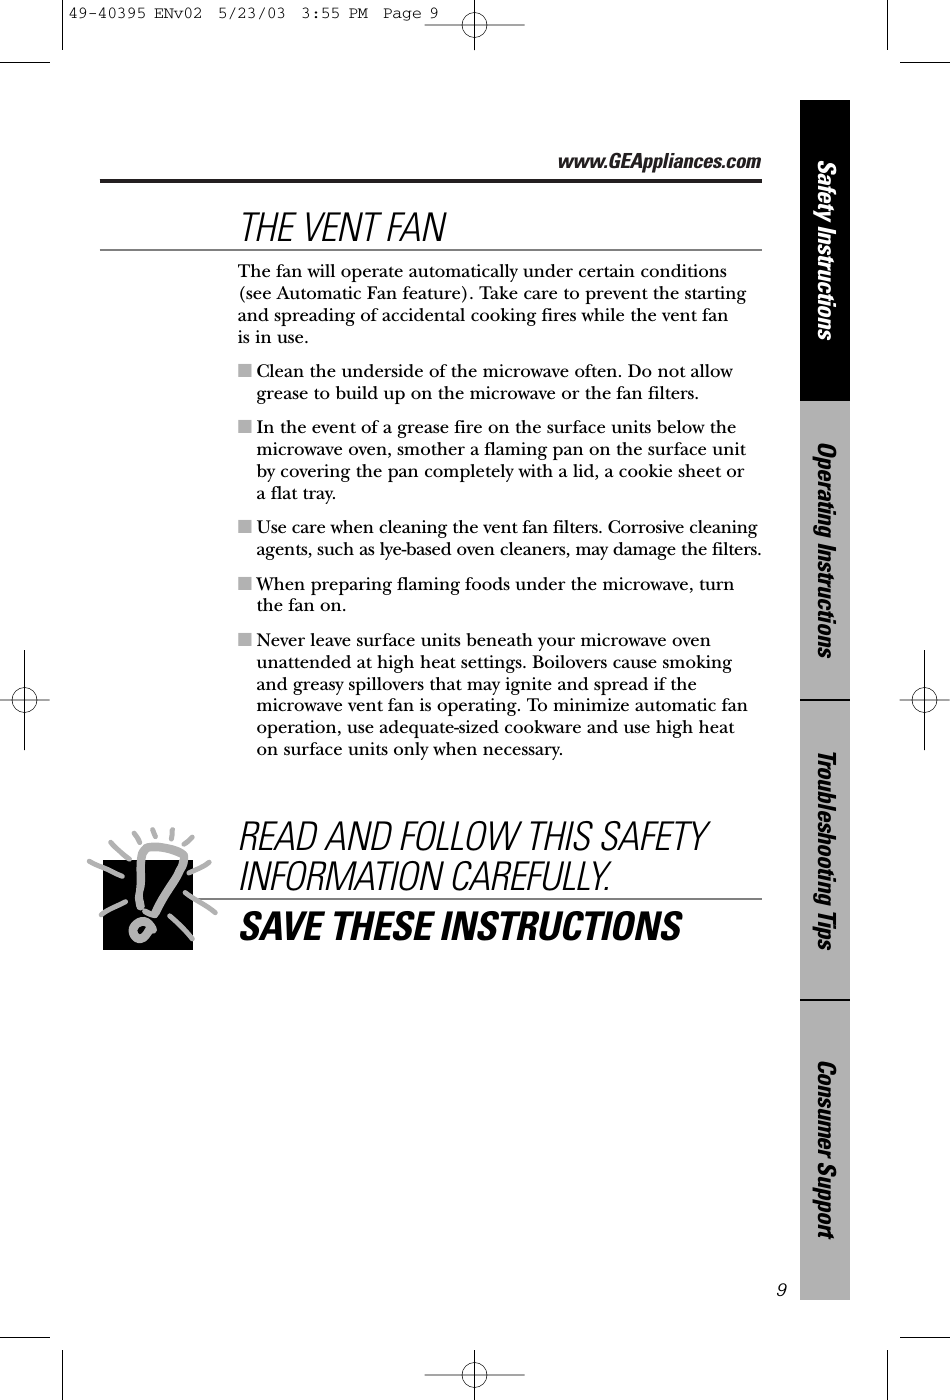 www.GEAppliances.comConsumer SupportTroubleshooting TipsOperating InstructionsSafety Instructions9READ AND FOLLOW THIS SAFETYINFORMATION CAREFULLY.SAVE THESE INSTRUCTIONSThe fan will operate automatically under certain conditions(see Automatic Fan feature). Take care to prevent the startingand spreading of accidental cooking fires while the vent fan is in use. ■Clean the underside of the microwave often. Do not allowgrease to build up on the microwave or the fan filters.■In the event of a grease fire on the surface units below themicrowave oven, smother a flaming pan on the surface unitby covering the pan completely with a lid, a cookie sheet or a flat tray.■Use care when cleaning the vent fan filters. Corrosive cleaningagents, such as lye-based oven cleaners, may damage the filters.■When preparing flaming foods under the microwave, turnthe fan on. ■Never leave surface units beneath your microwave ovenunattended at high heat settings. Boilovers cause smokingand greasy spillovers that may ignite and spread if themicrowave vent fan is operating. To minimize automatic fanoperation, use adequate-sized cookware and use high heat on surface units only when necessary.THE VENT FAN49-40395 ENv02  5/23/03  3:55 PM  Page 9